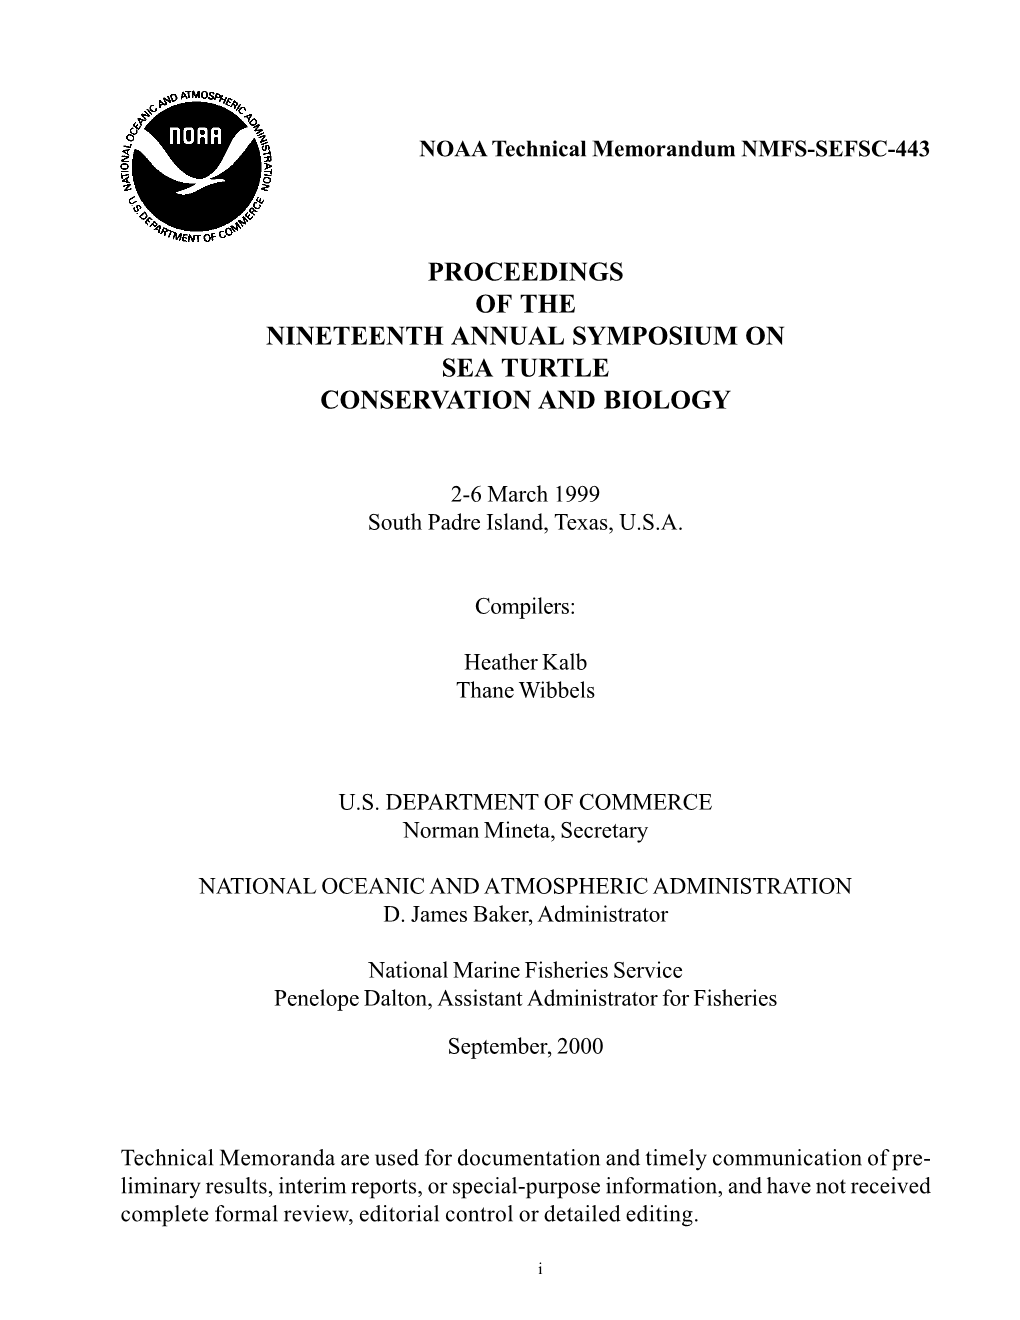 Proceedings of the Nineteenth Annual Symposium on Sea Turtle Conservation and Biology